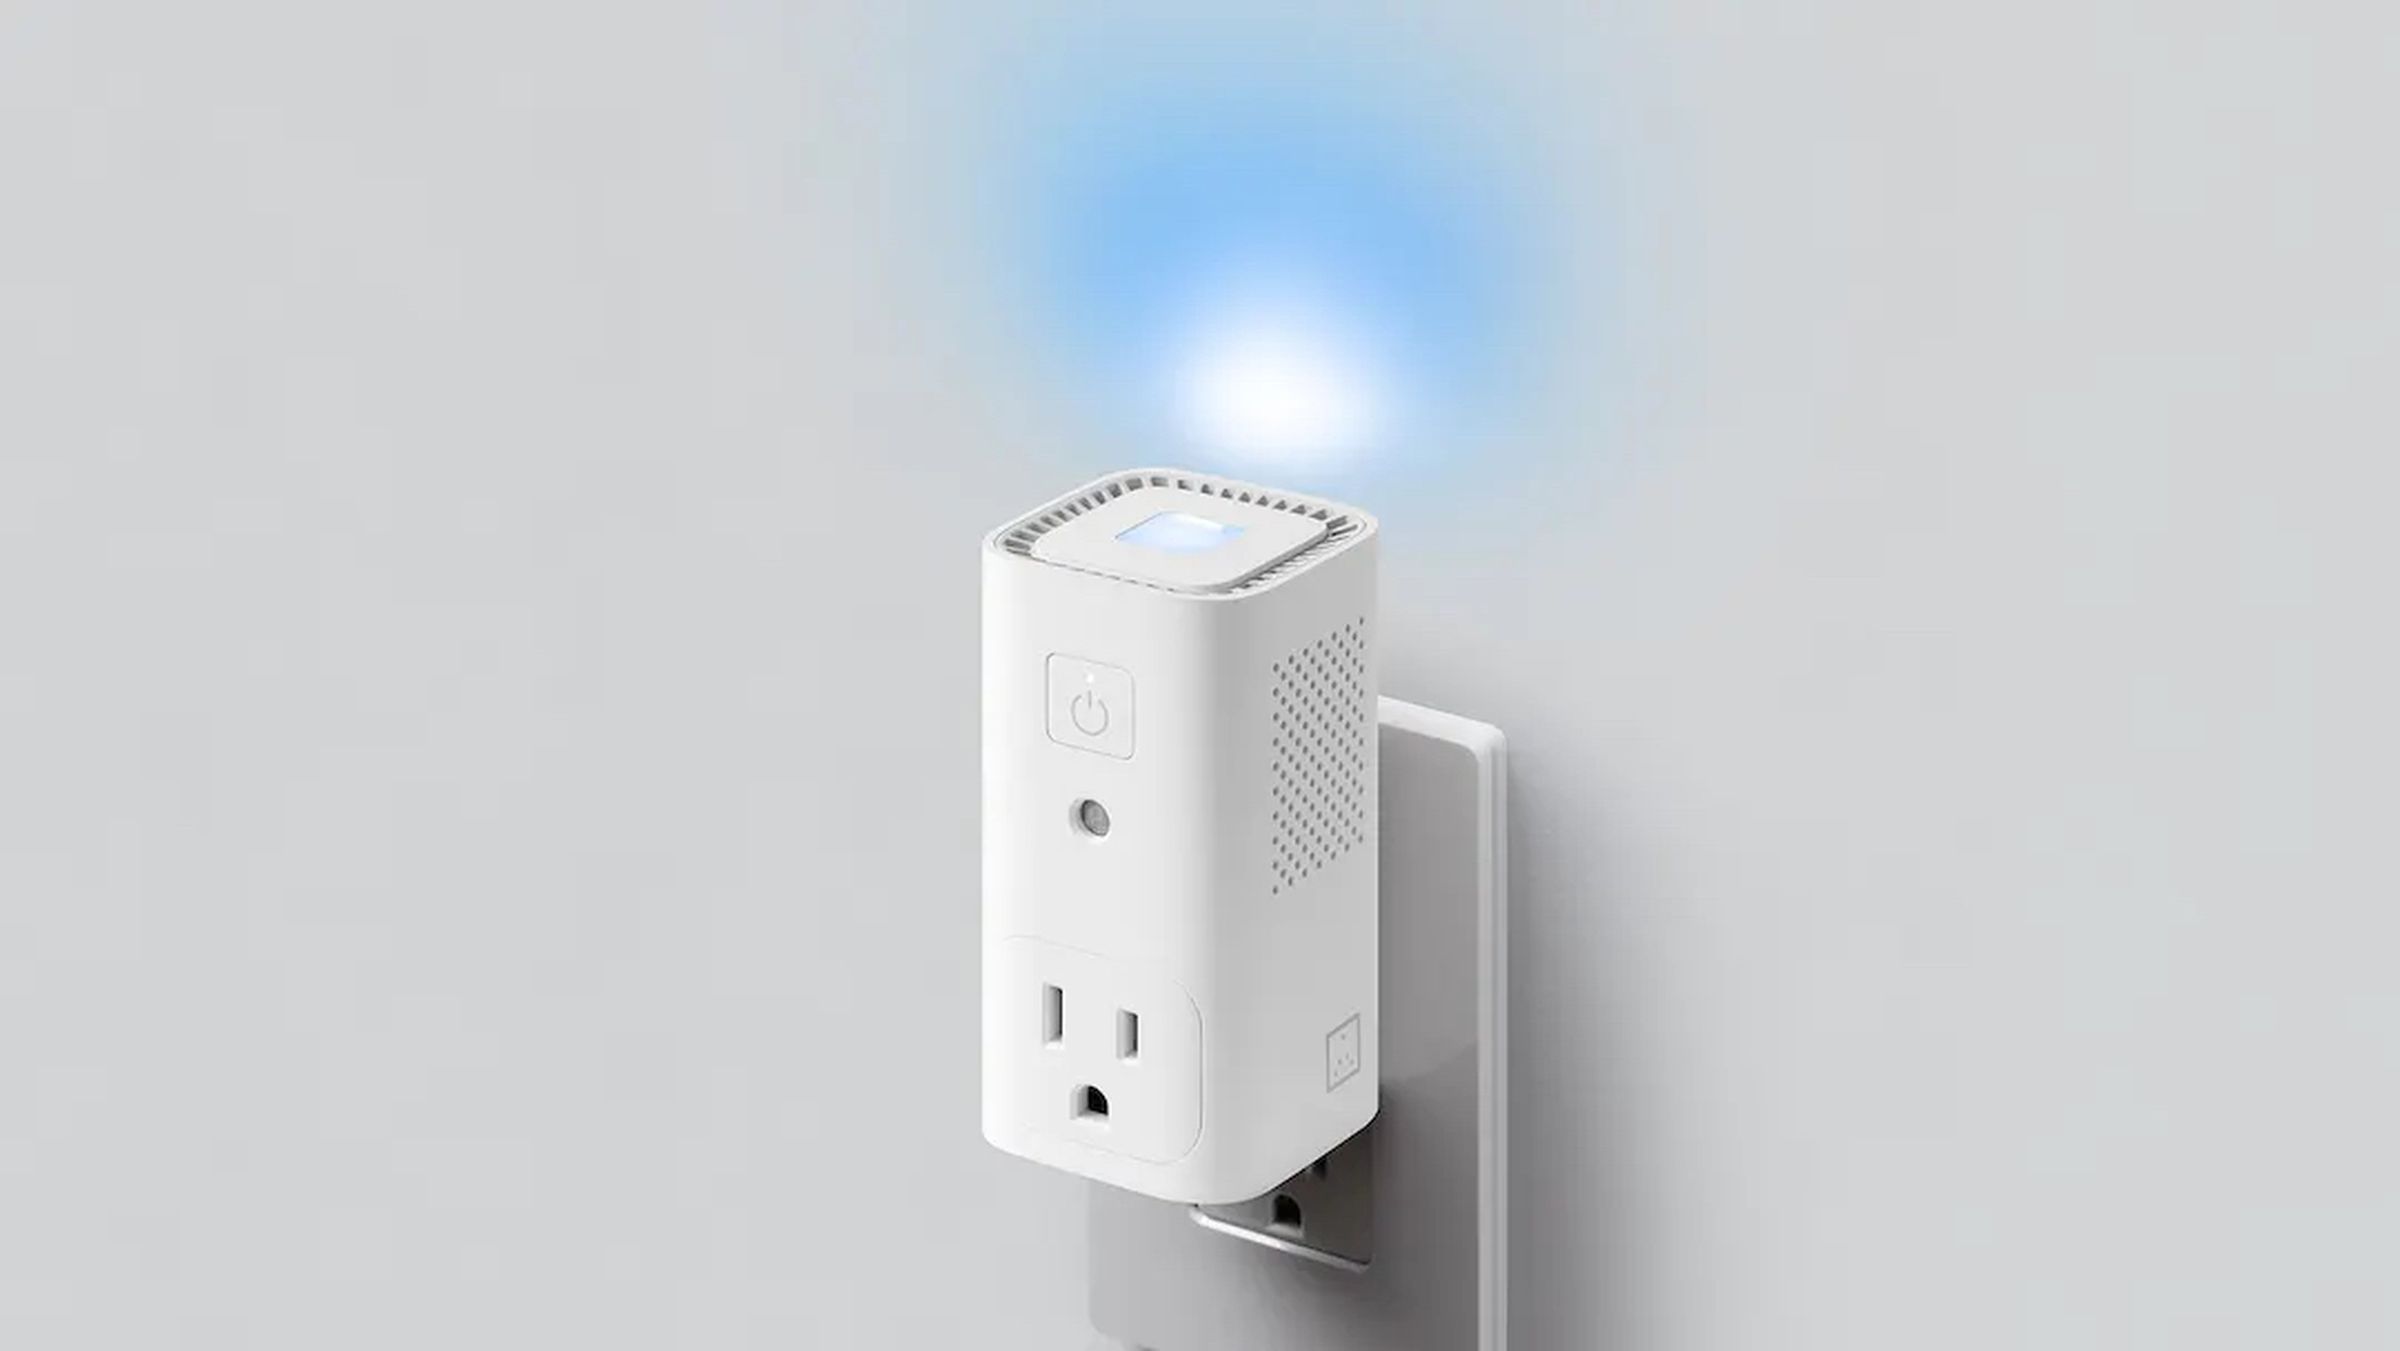 The Glow-C was a smart plug with an air quality monitor built-in. It could activate a fan or air purifier plugged into it if it sensed a drop in air quality.